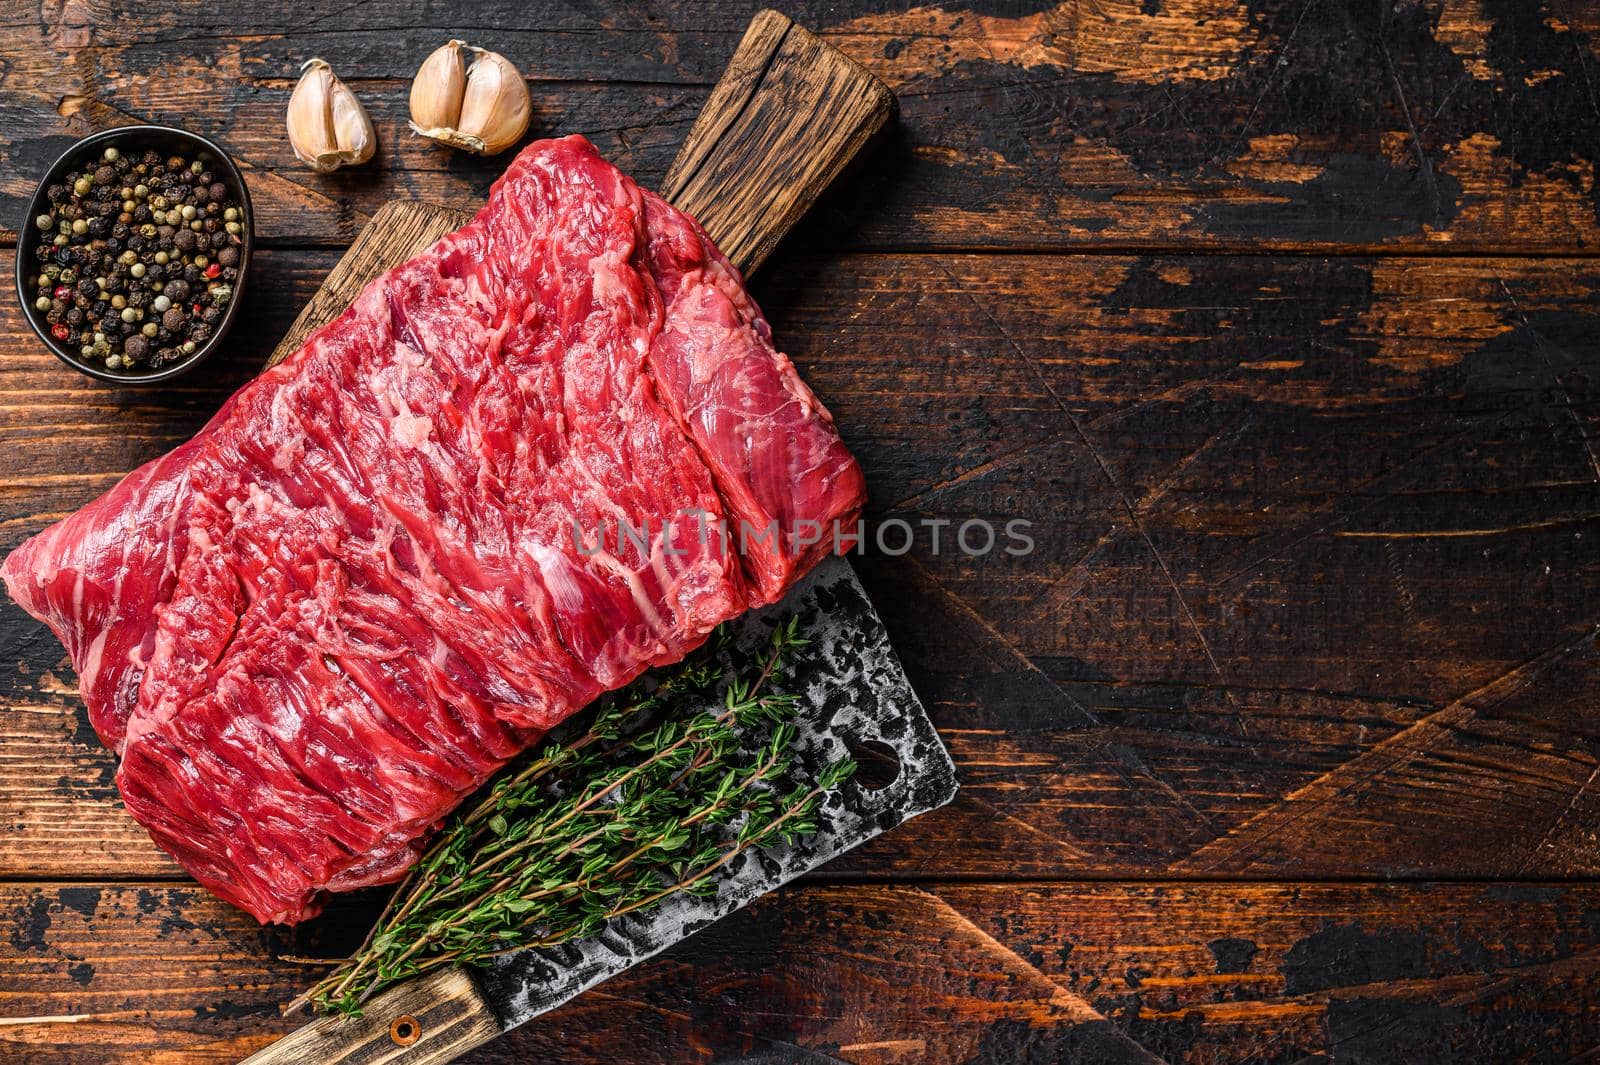 Big piece of raw beef brisket cut meat with herbs and butcher cleaver. Dark wooden background. Top view. Copy space.